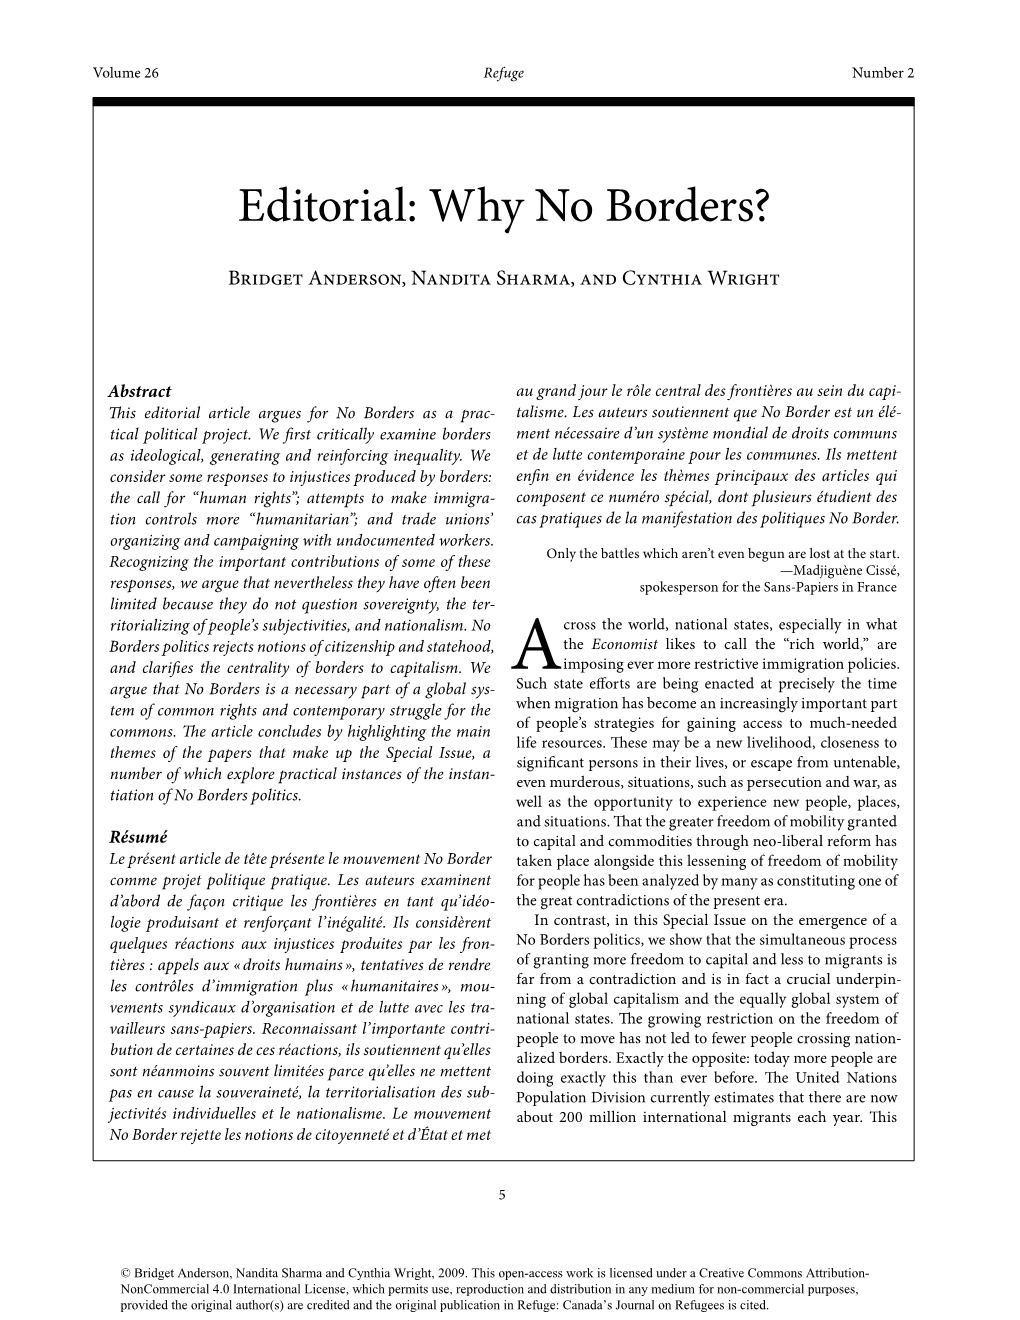 Why No Borders?